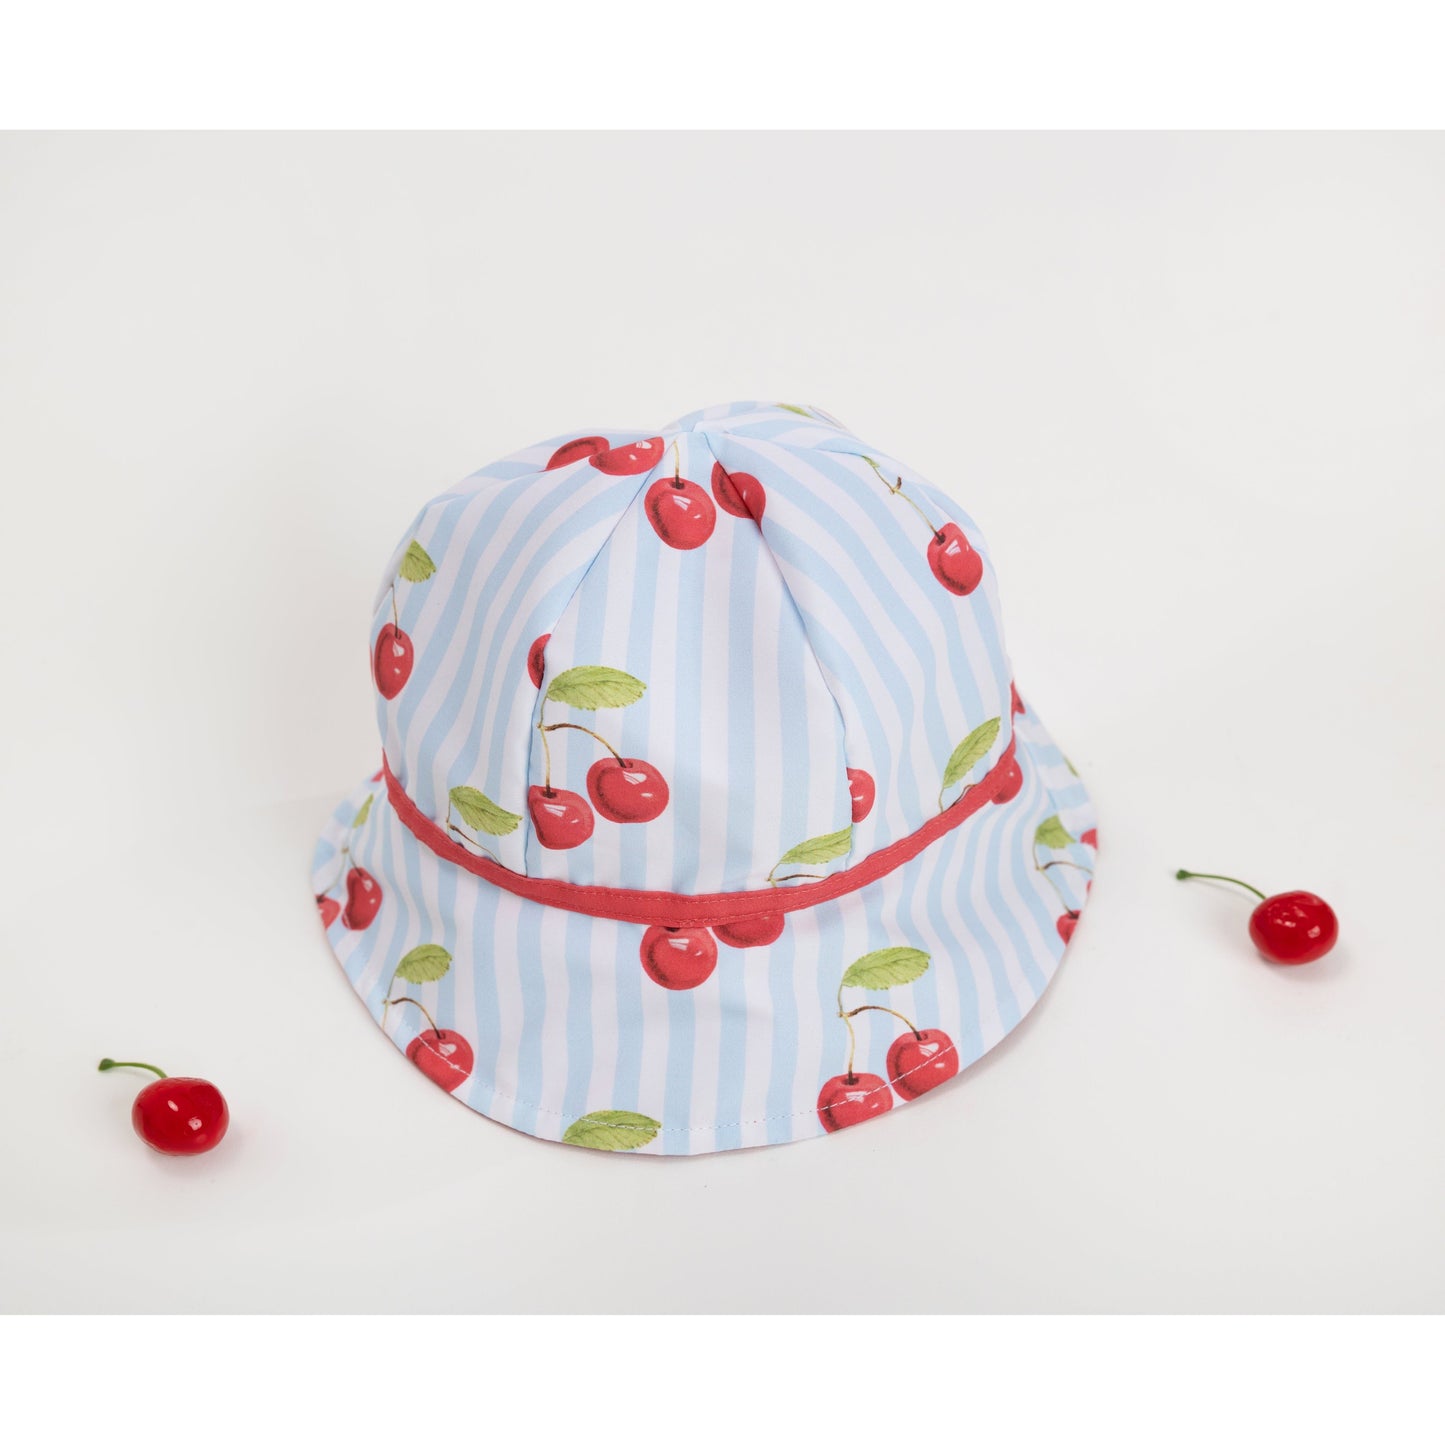 Load image into Gallery viewer, Boys Meia Pata cherry print sun hat - Adora
